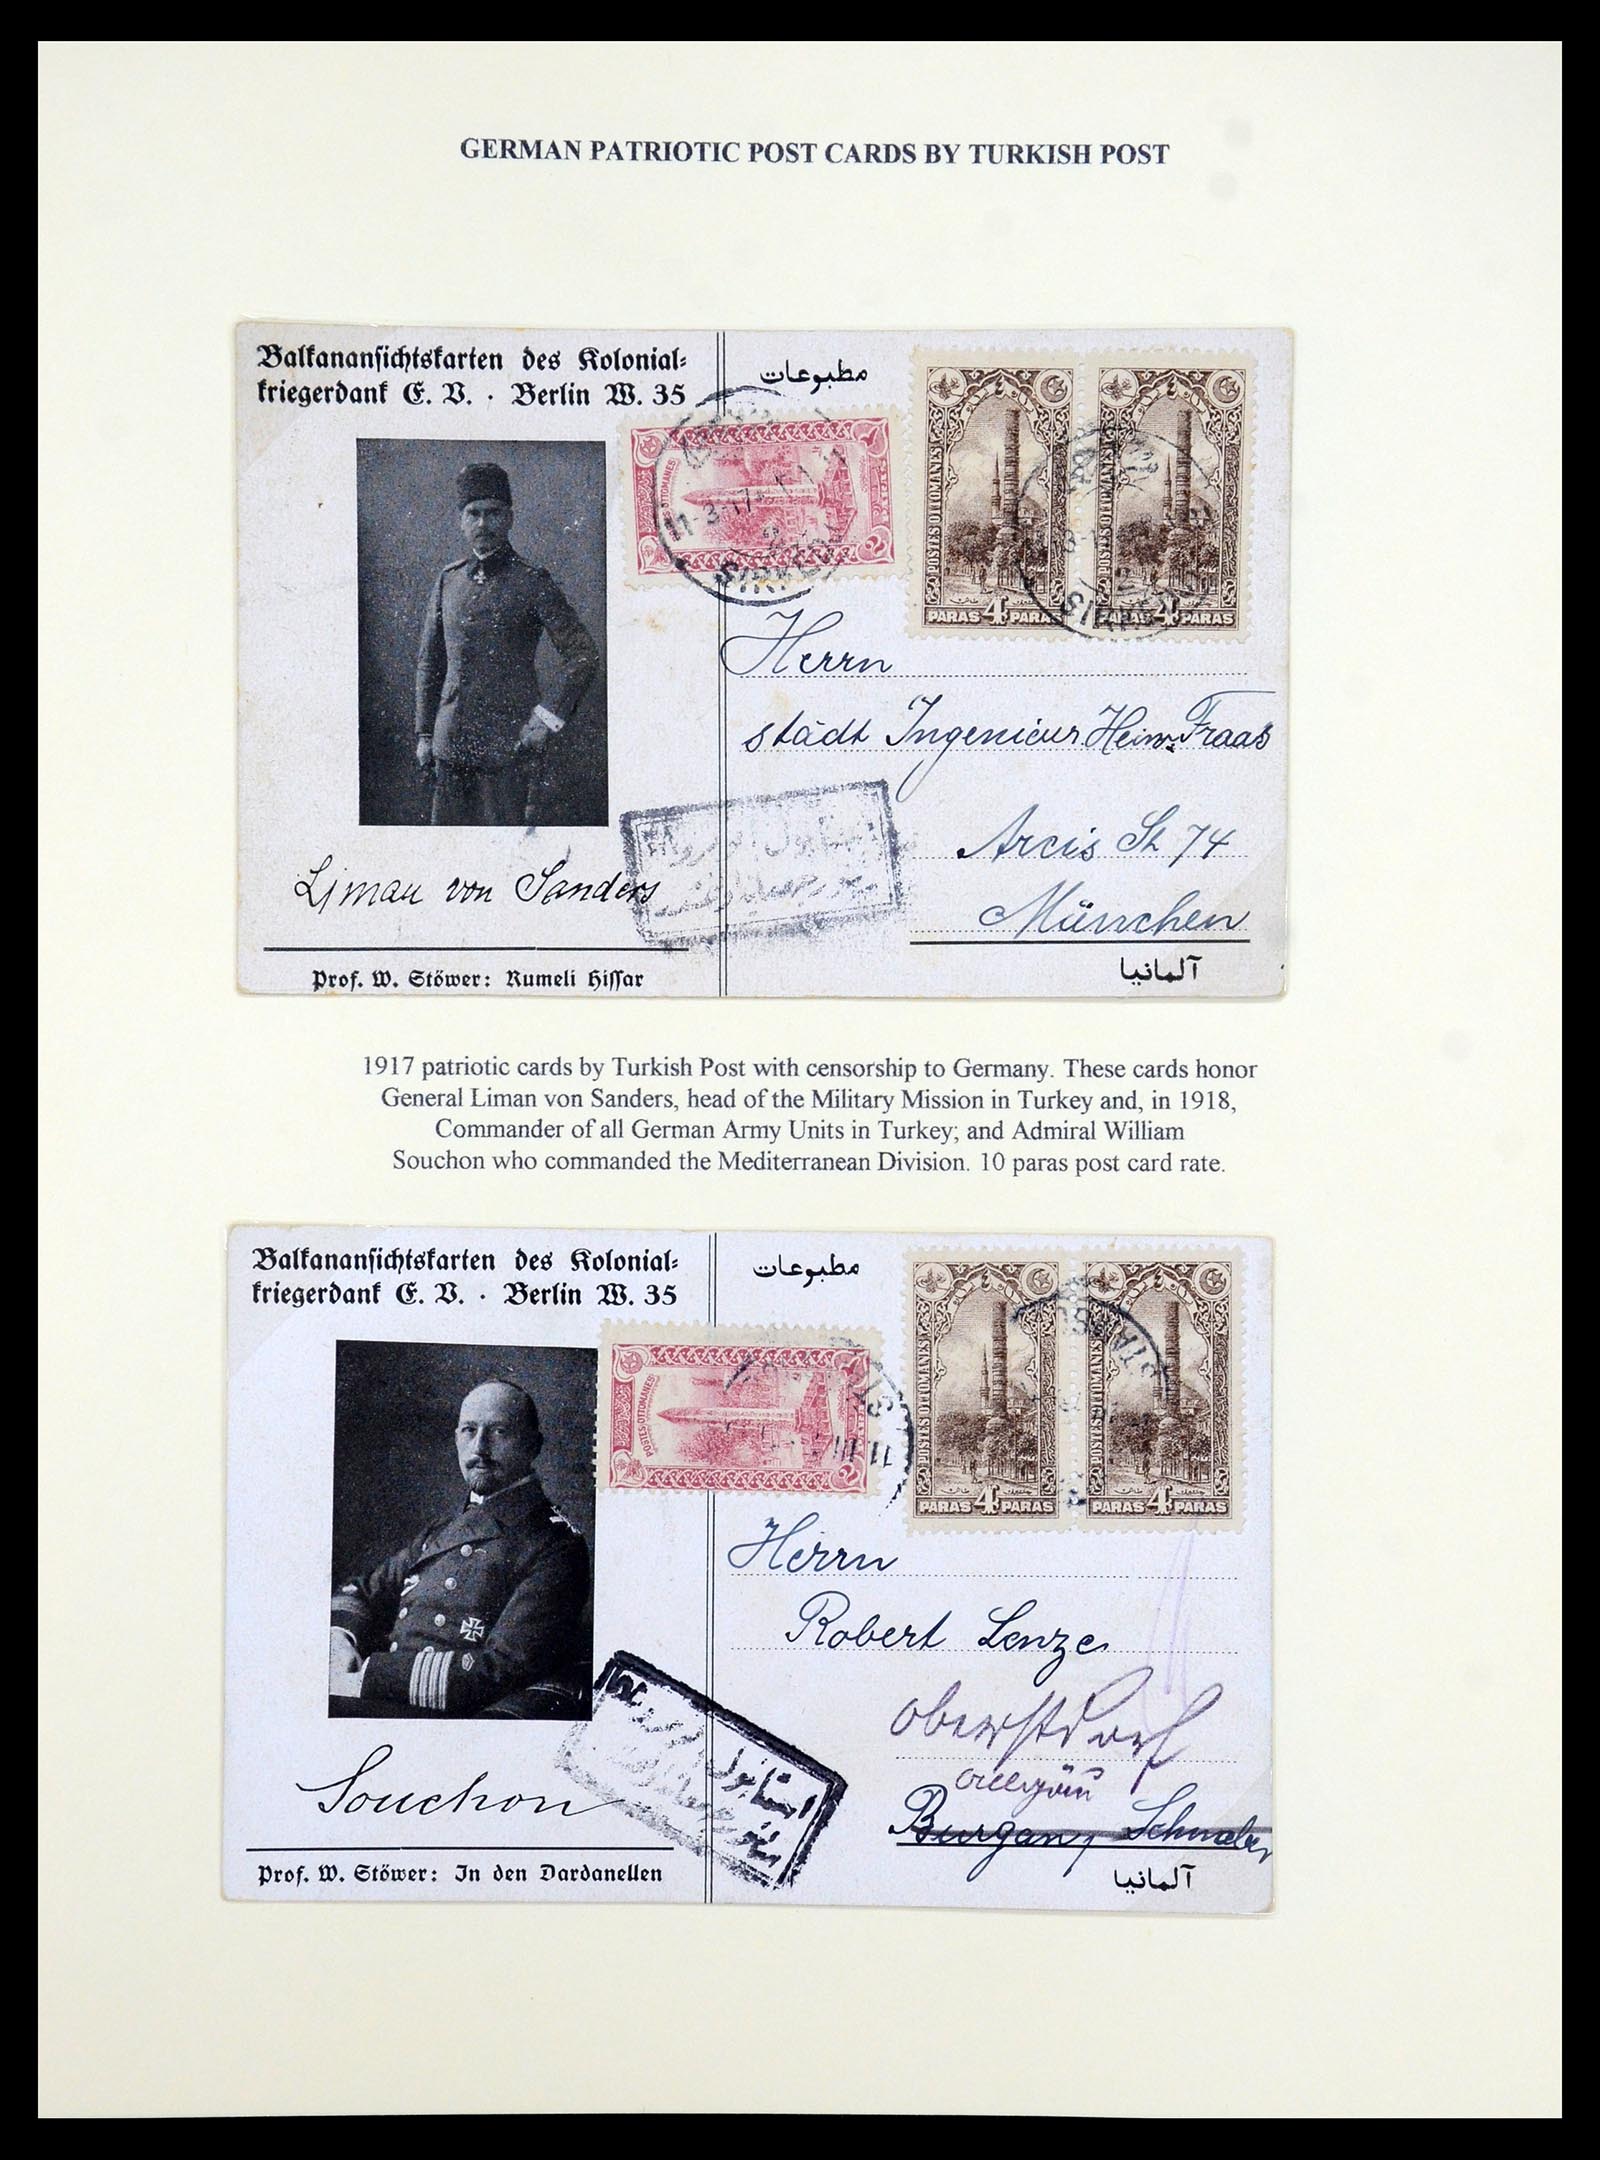 35515 020 - Stamp Collection 35515 Germany covers og Military mission in Turkey 1914